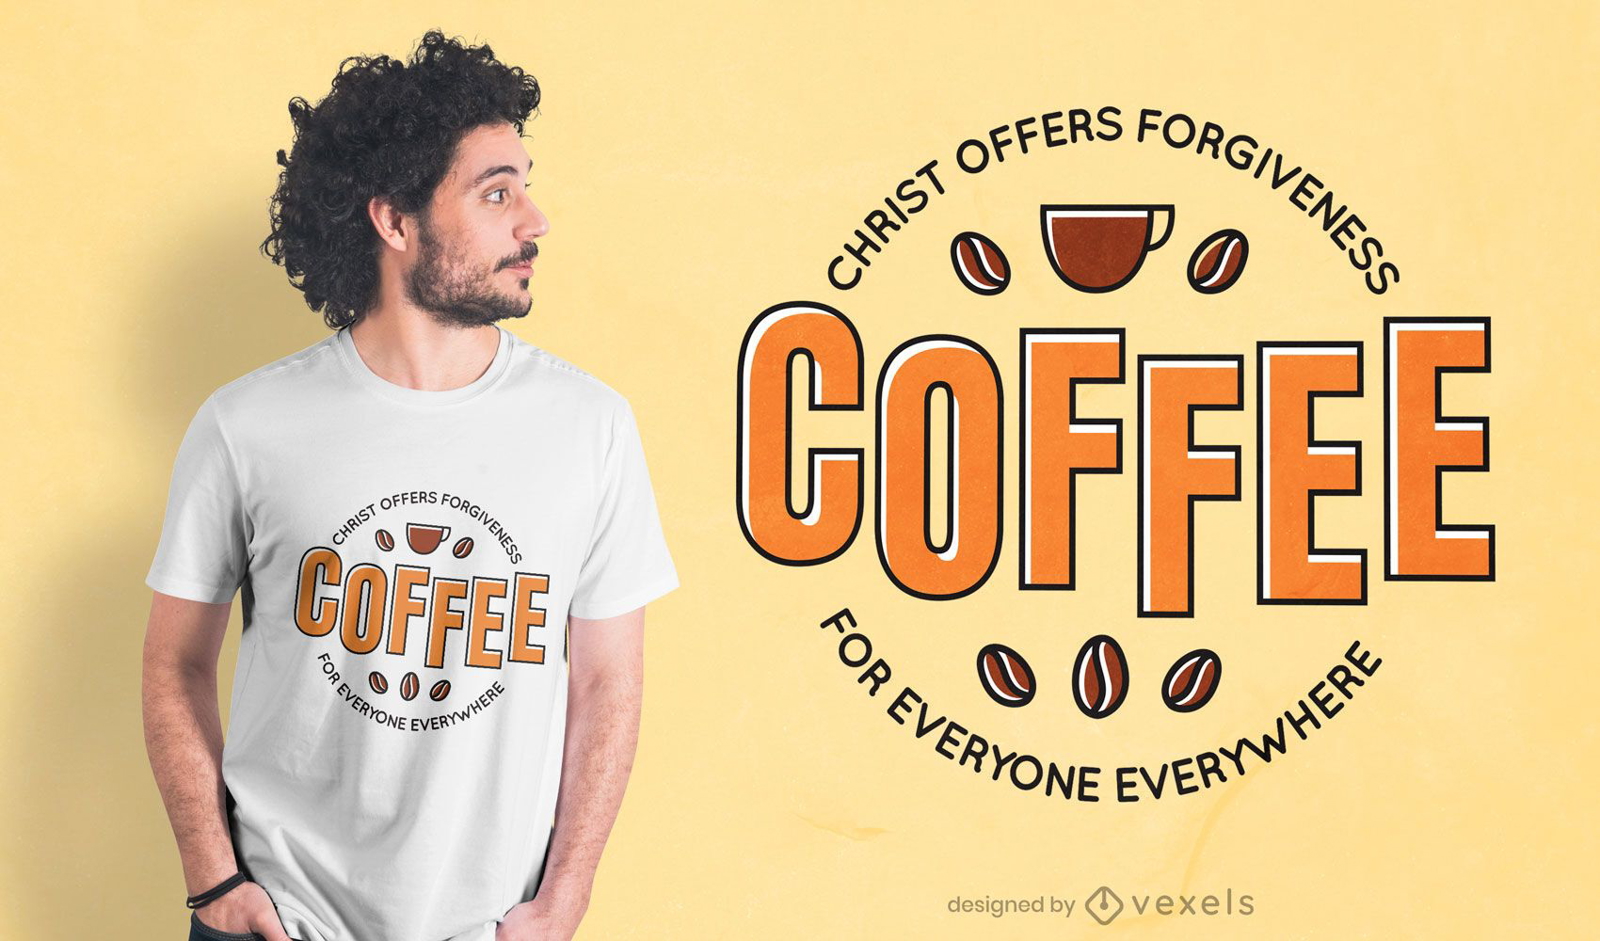 Coffee christ quote t-shirt design